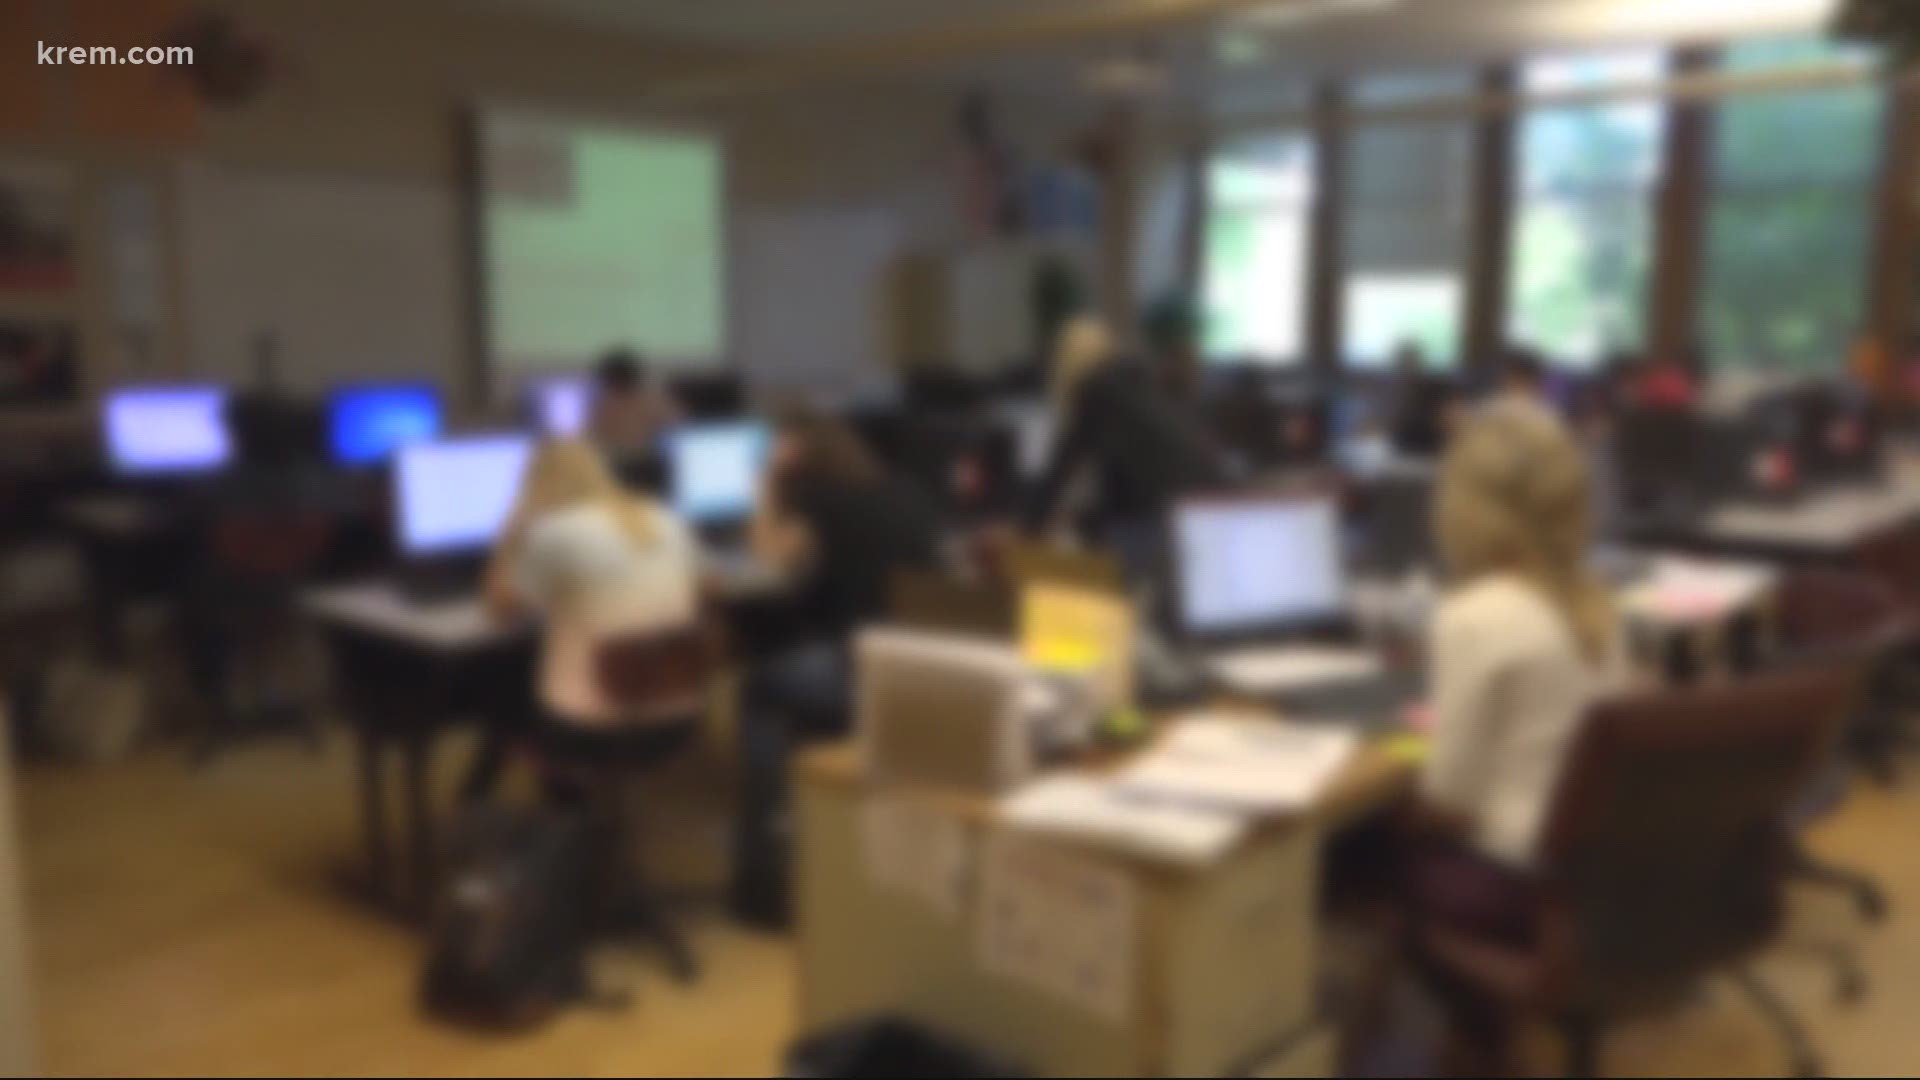 The Coeur d'Alene School District recently announced their plan for classes this year. There's going to be a mix of in-person and virtual classes.